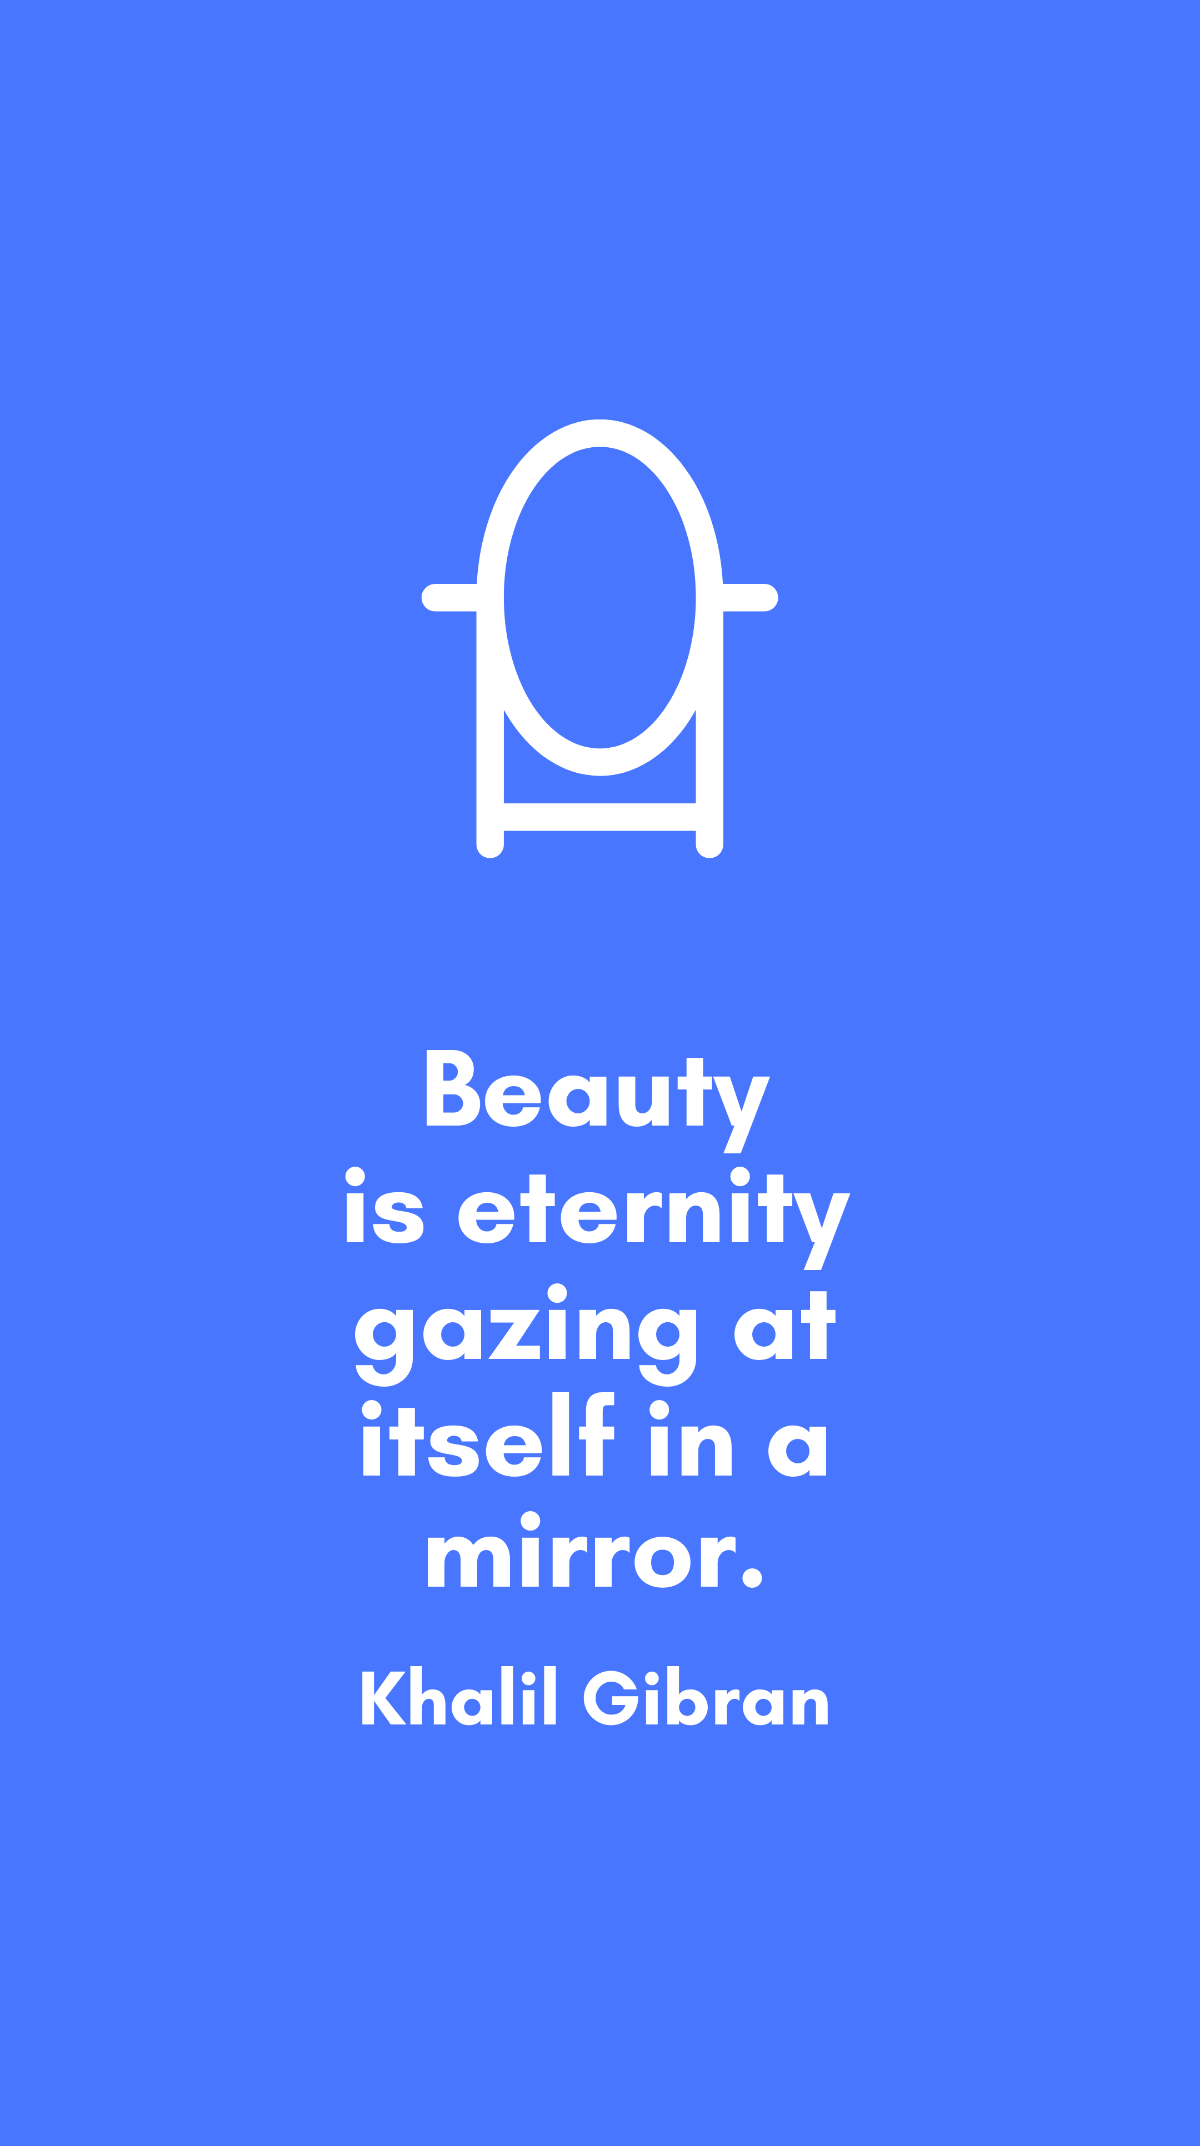 Free Khalil Gibran - Beauty is eternity gazing at itself in a mirror. Template